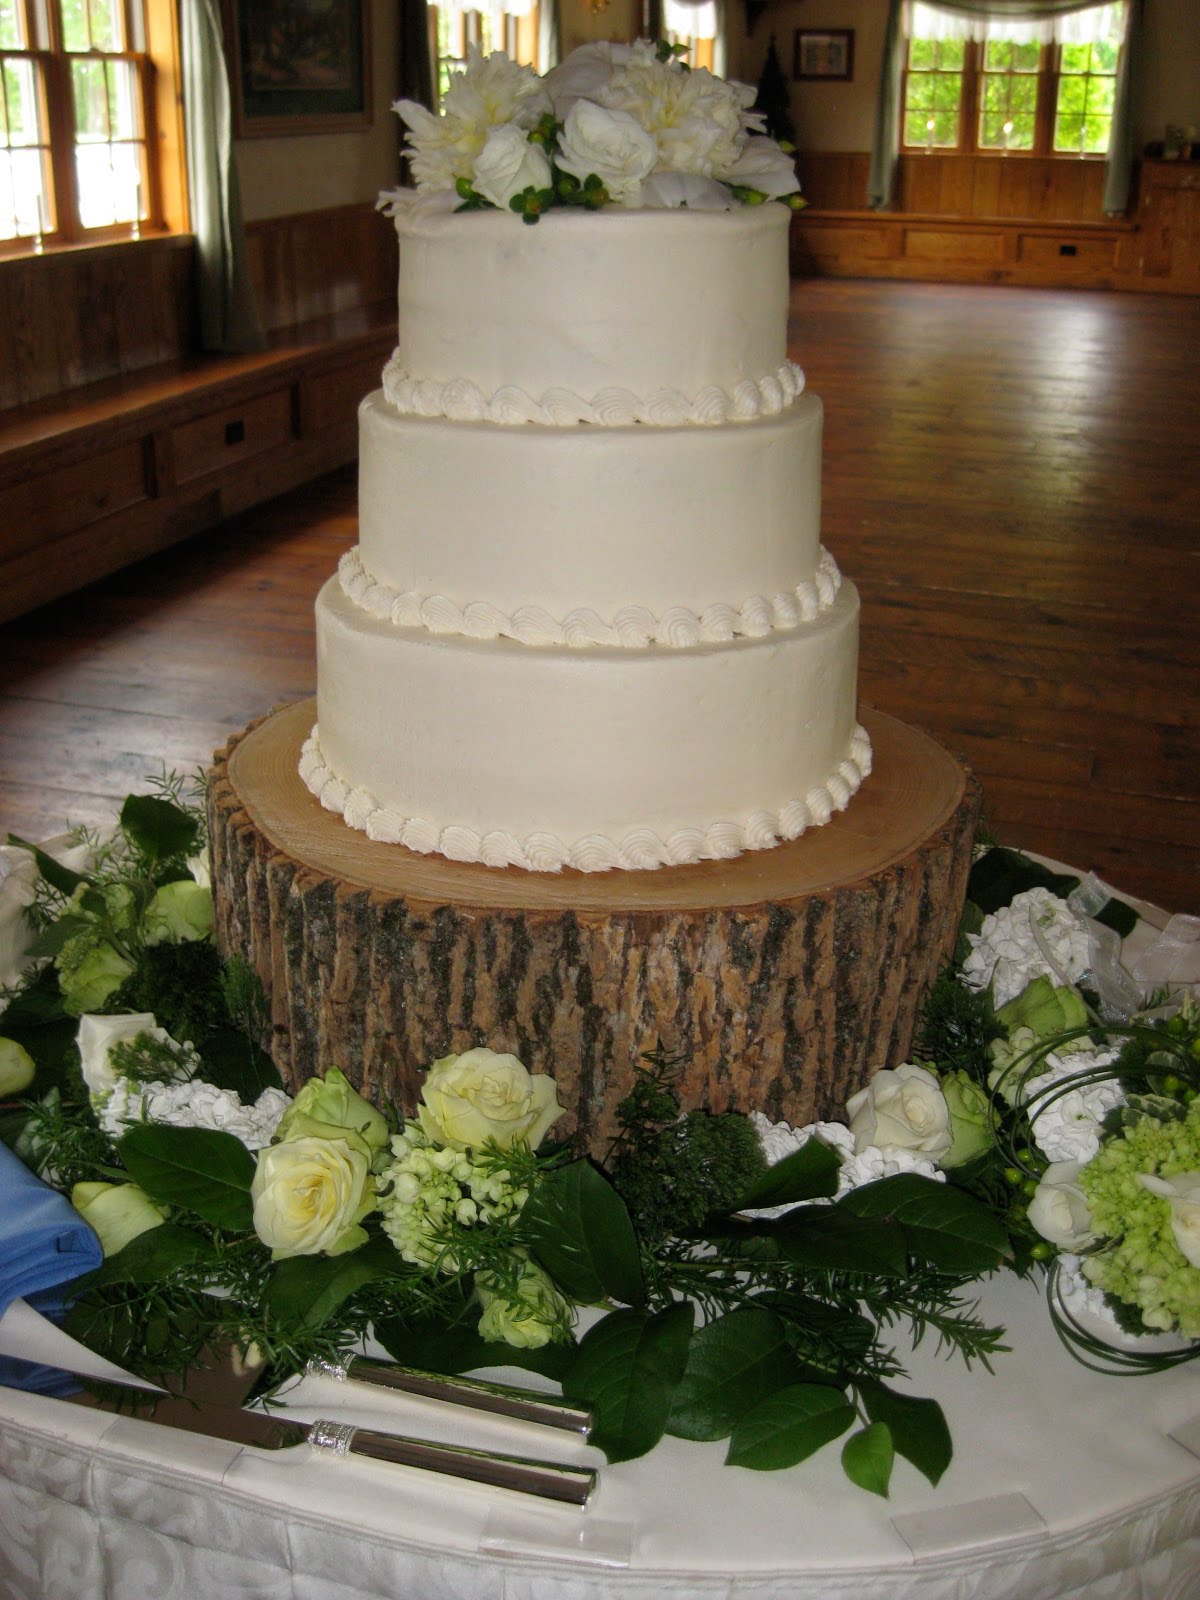 unique wedding cake designs Julie & Jason's beautiful cake on our tree stand. Country Elegance!